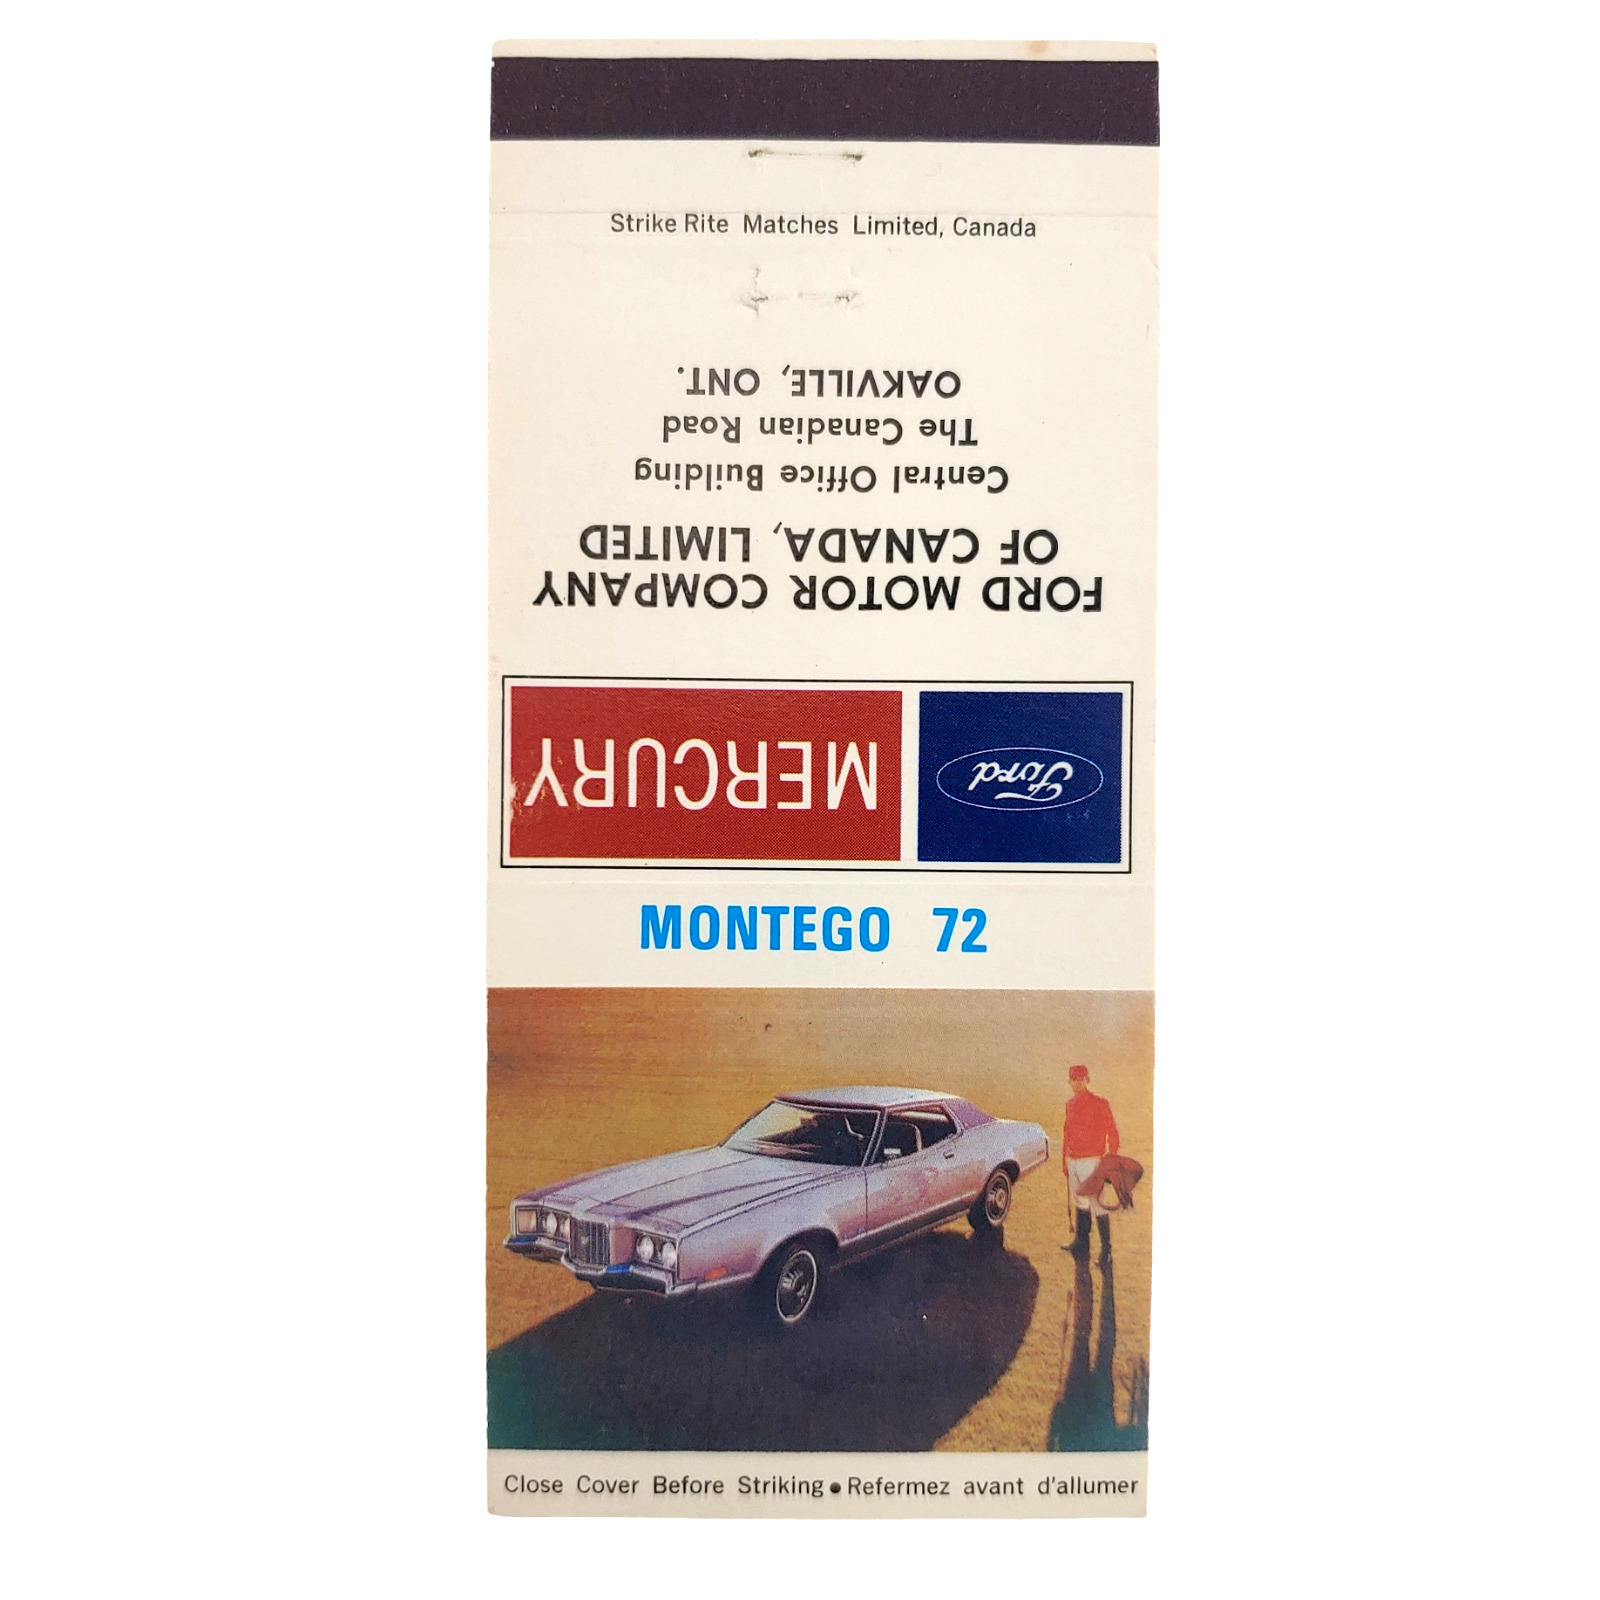 Vintage Matchbook Cover 1972 Mercury Montego - Ford Motor Company of Canada LTD